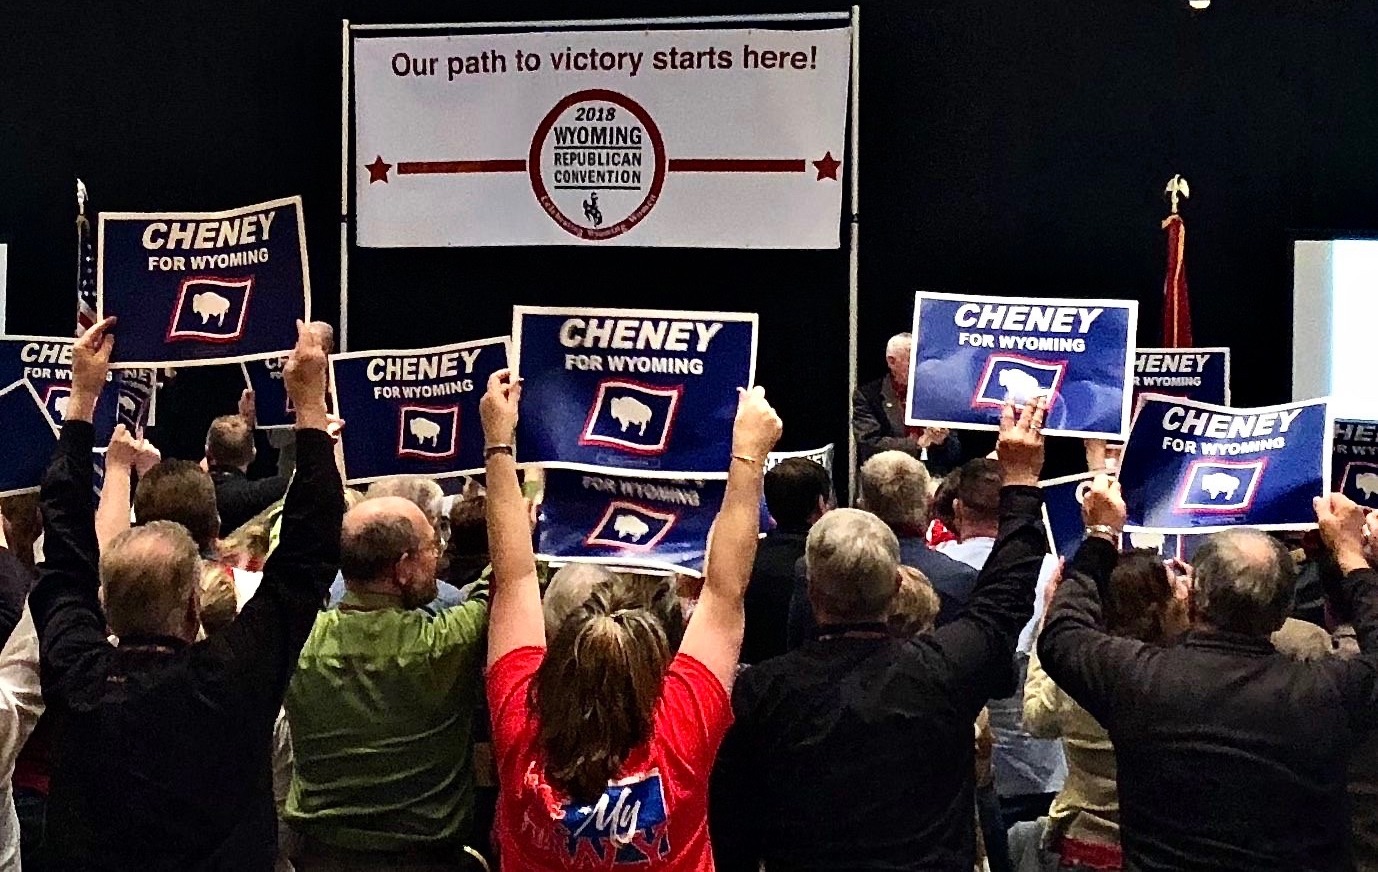 In 2018, Liz Cheney was still a darling of the Republican Party in Wyoming which has since excommunicated her. Four years ago, Cheney's Trump-backed challenger Harriet Hageman stumped for Cheney, touting her political conservative credentials.  Photo courtesy Liz Cheney public Facebook page